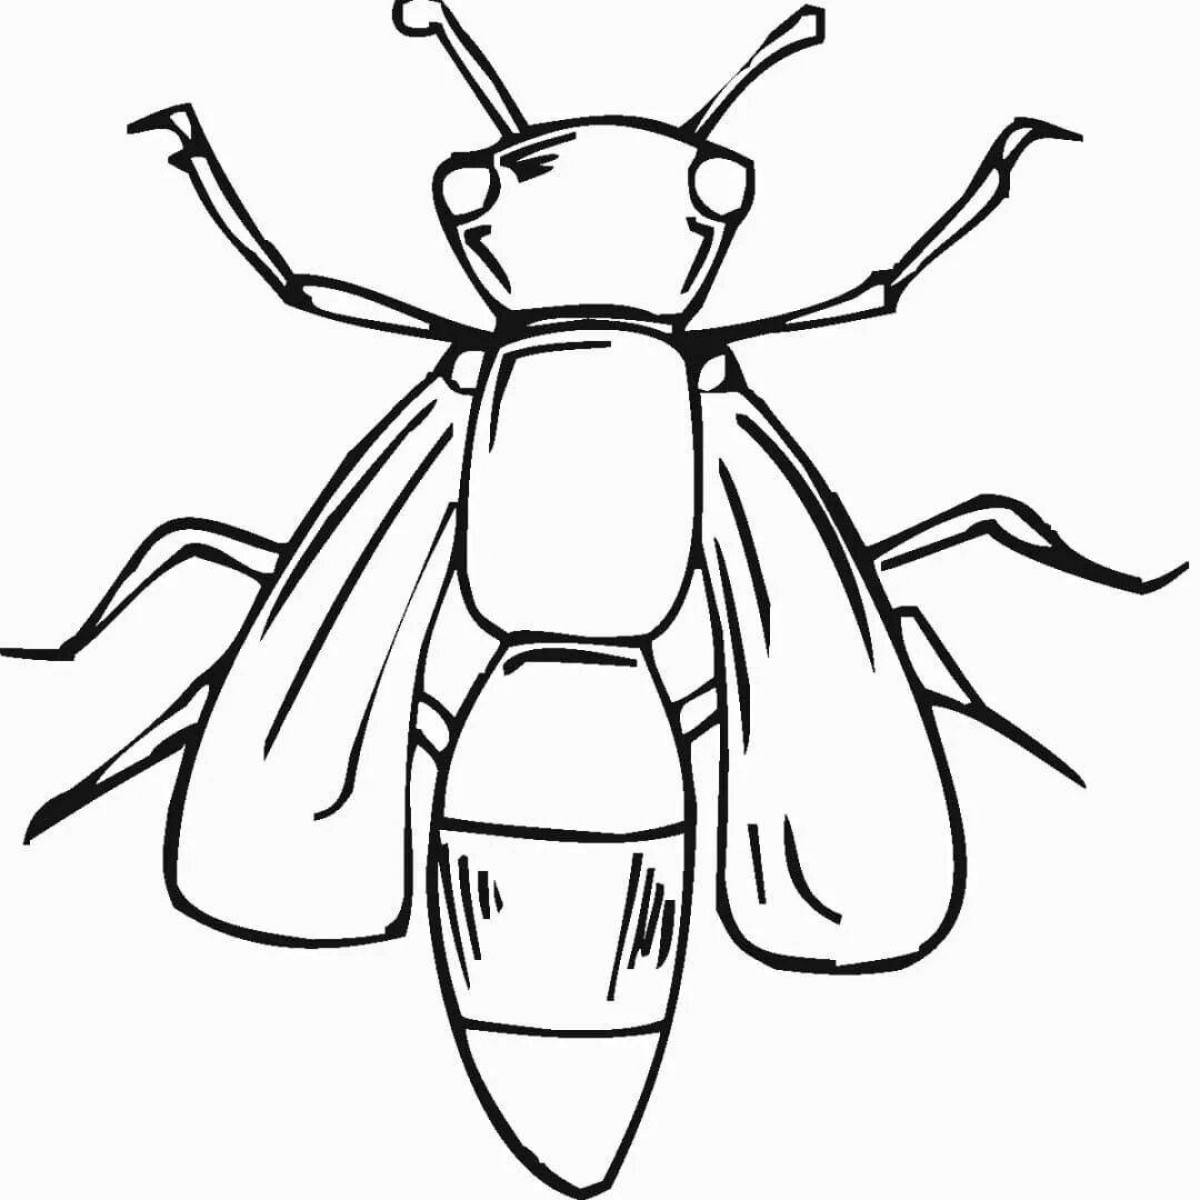 Radiant beetle coloring book